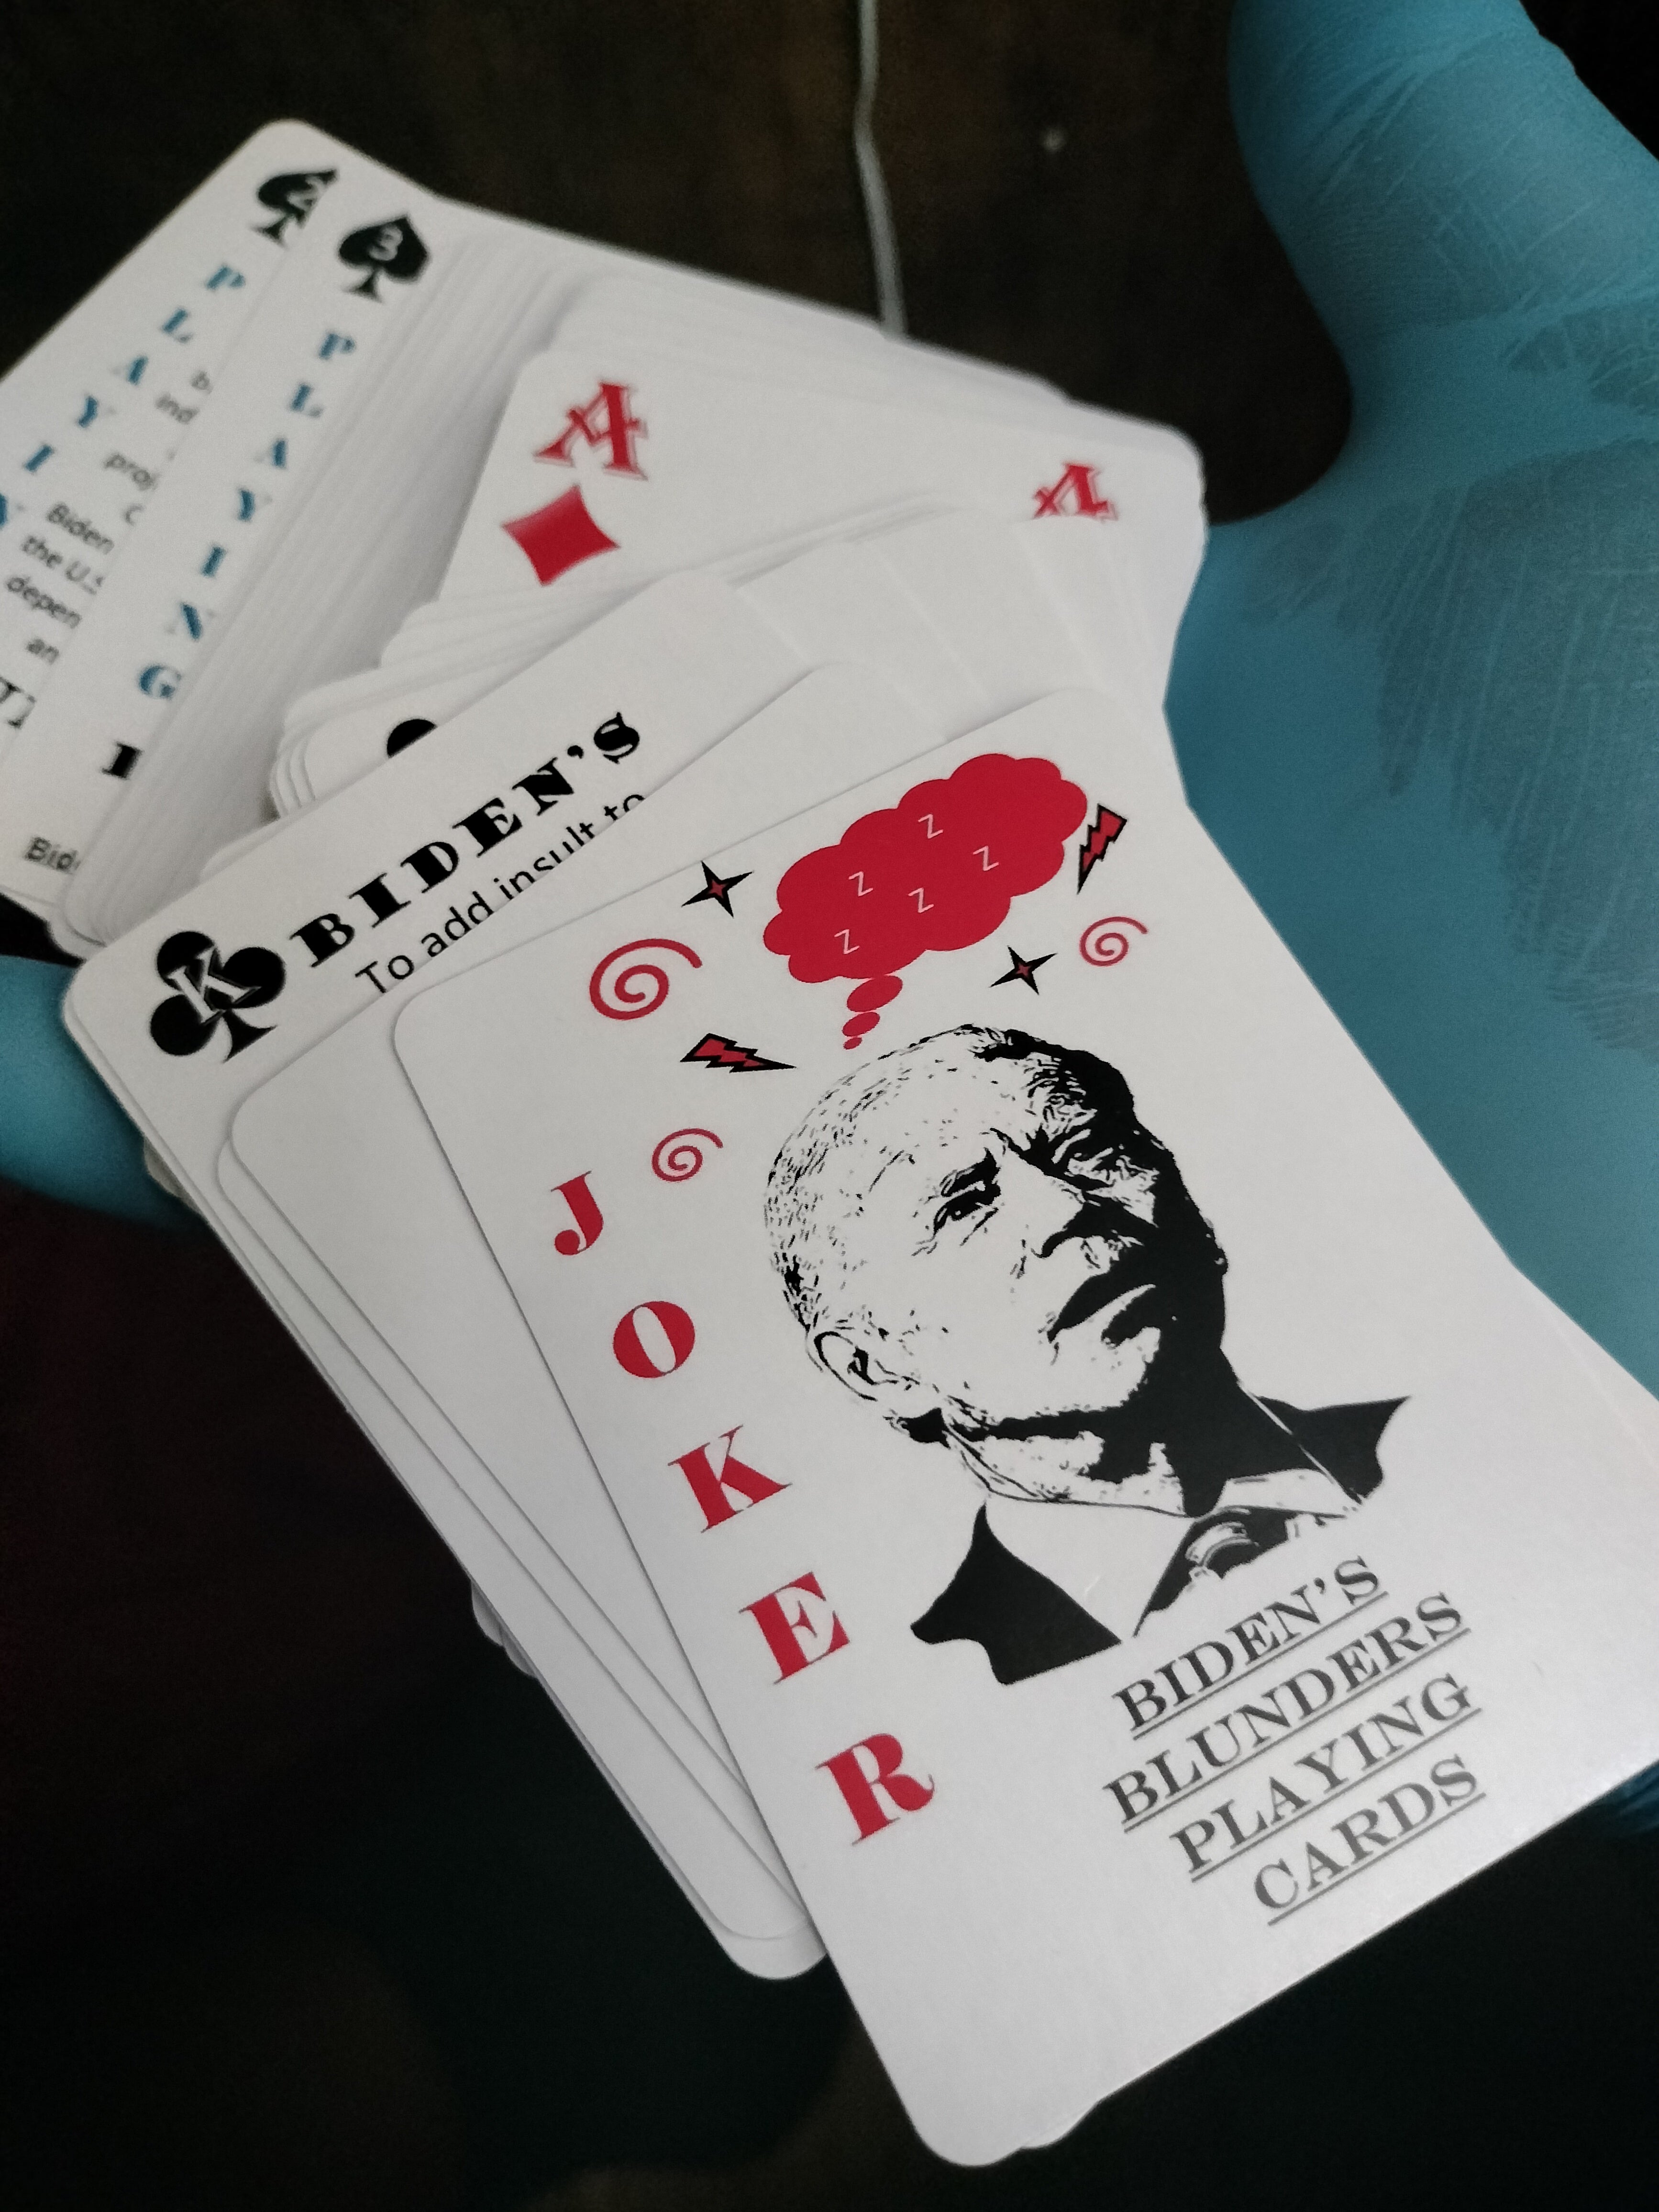 Biden's Blunders - The Card Game